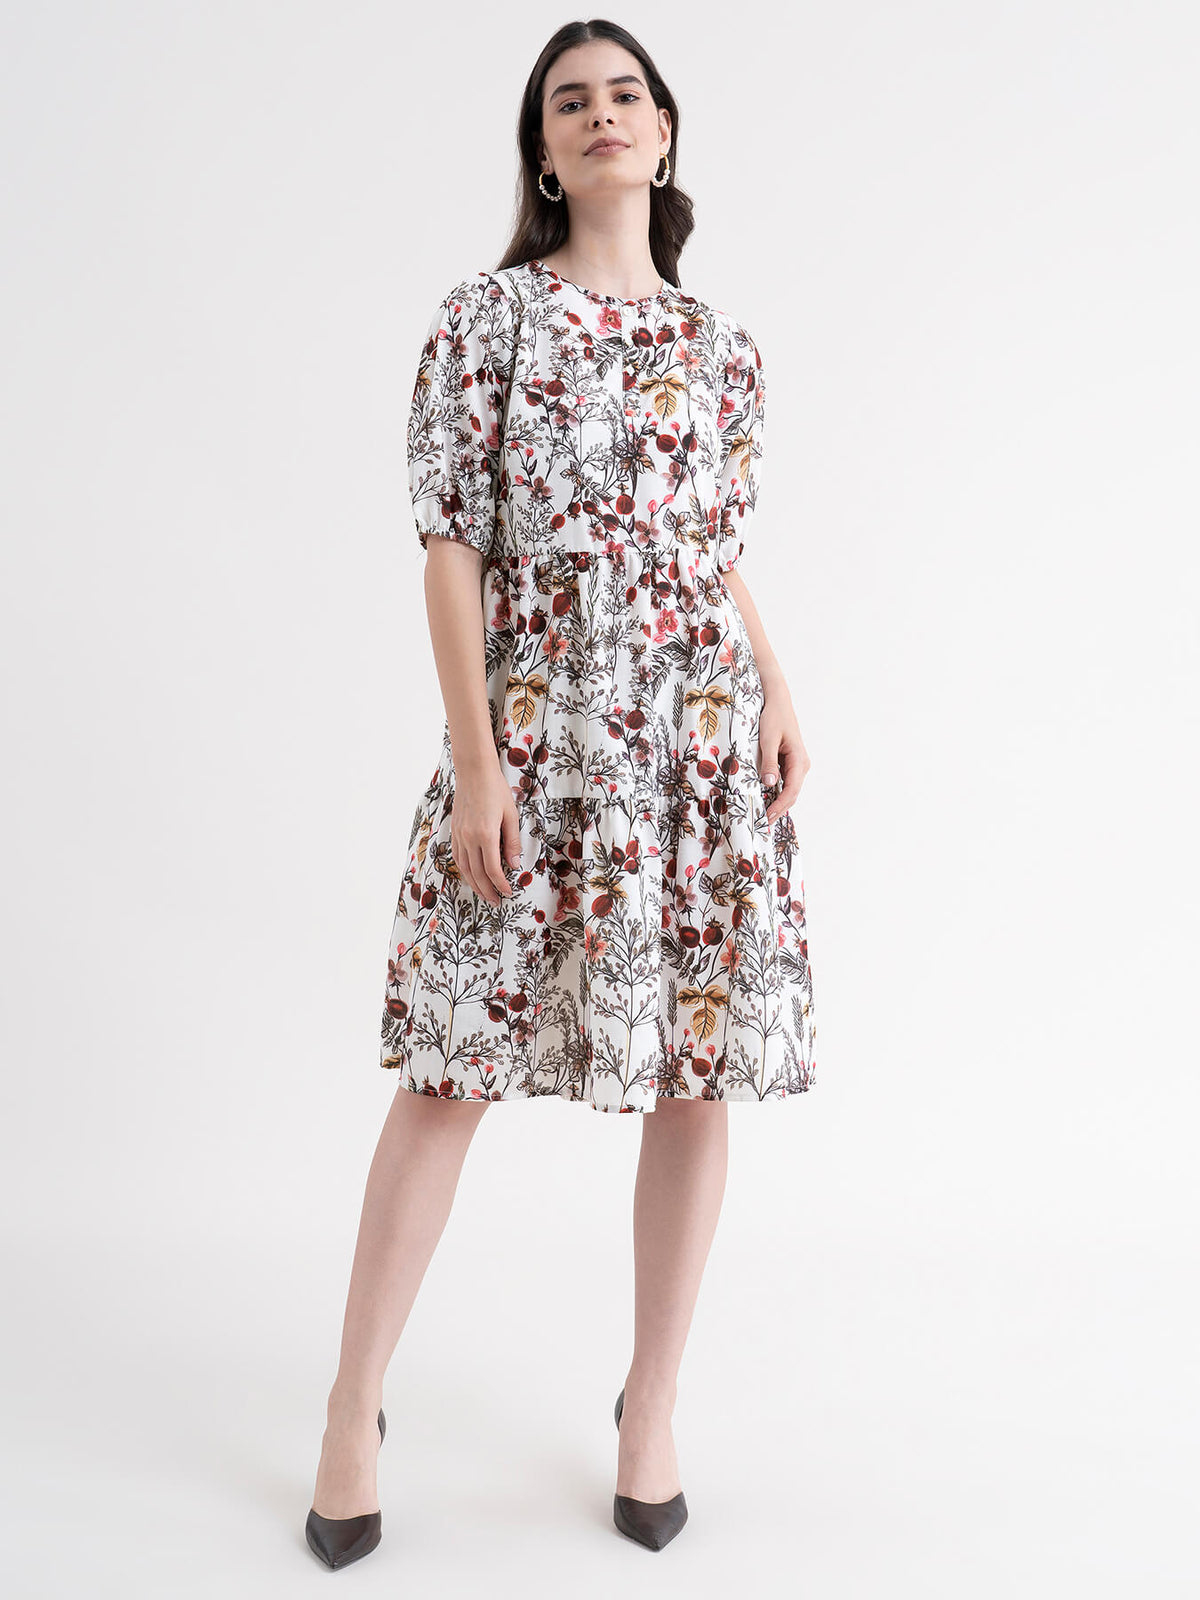 Floral Tiered Dress - White And Red